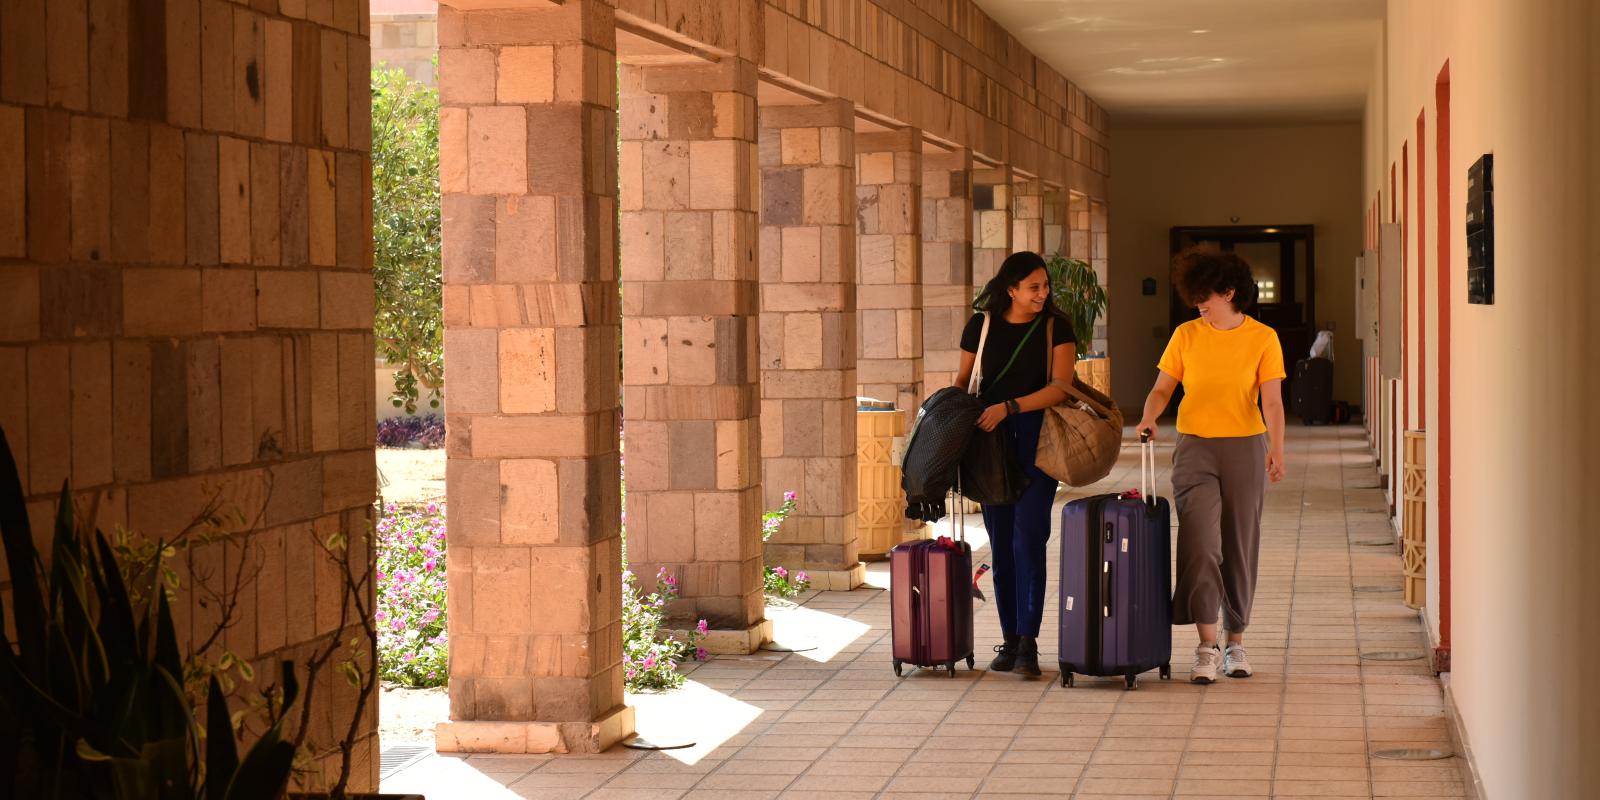 AUC students move into the University Residences